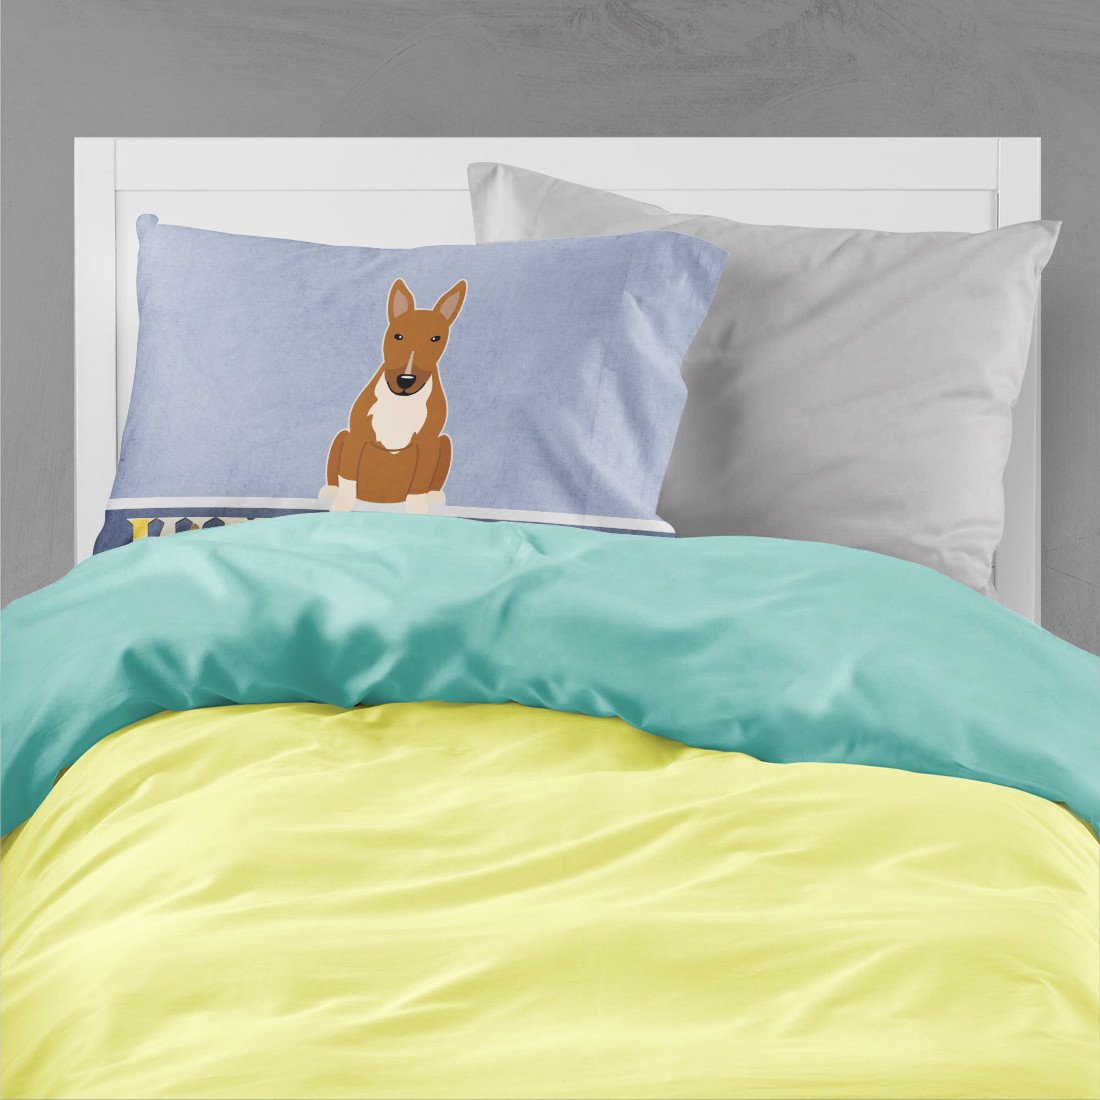 Bull Terrier Red Welcome Fabric Standard Pillowcase BB5715PILLOWCASE by Caroline's Treasures